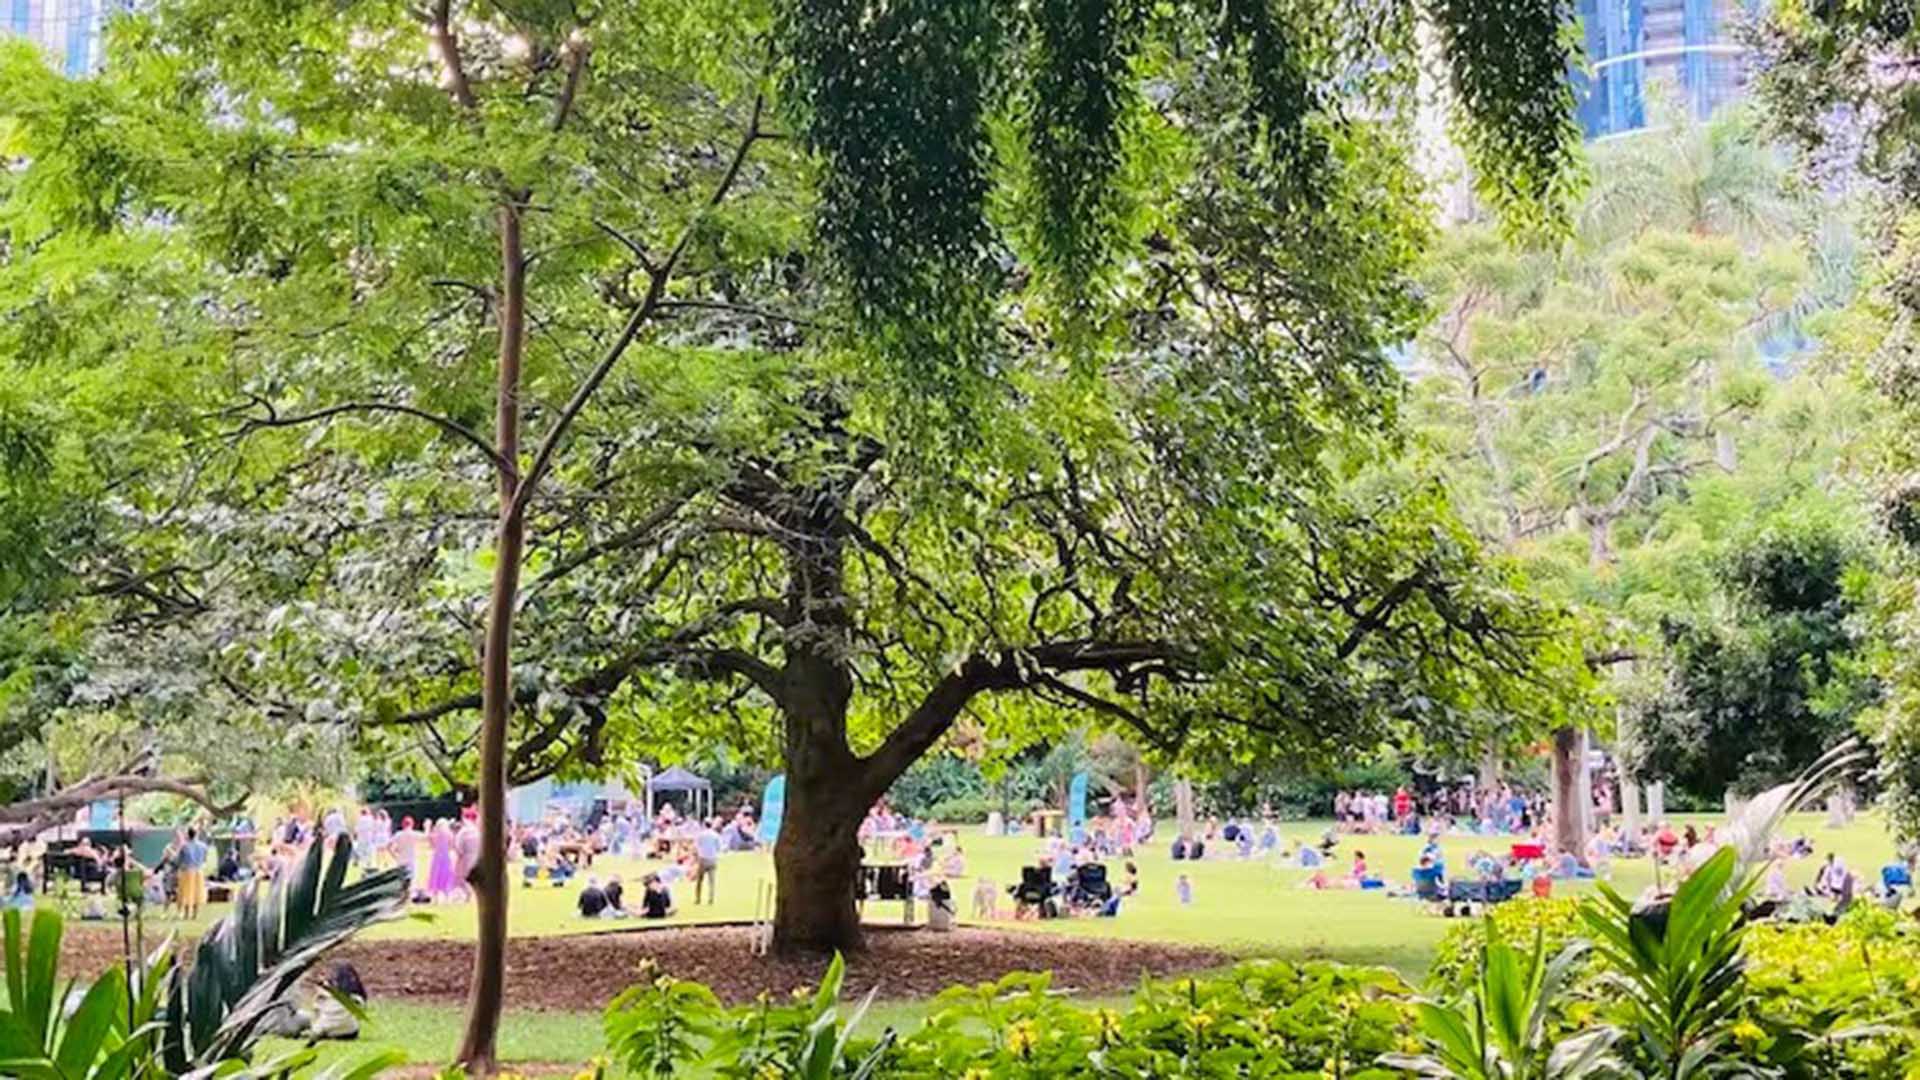 1 in 4 Australians is lonely. Quality green spaces in our cities offer a solution